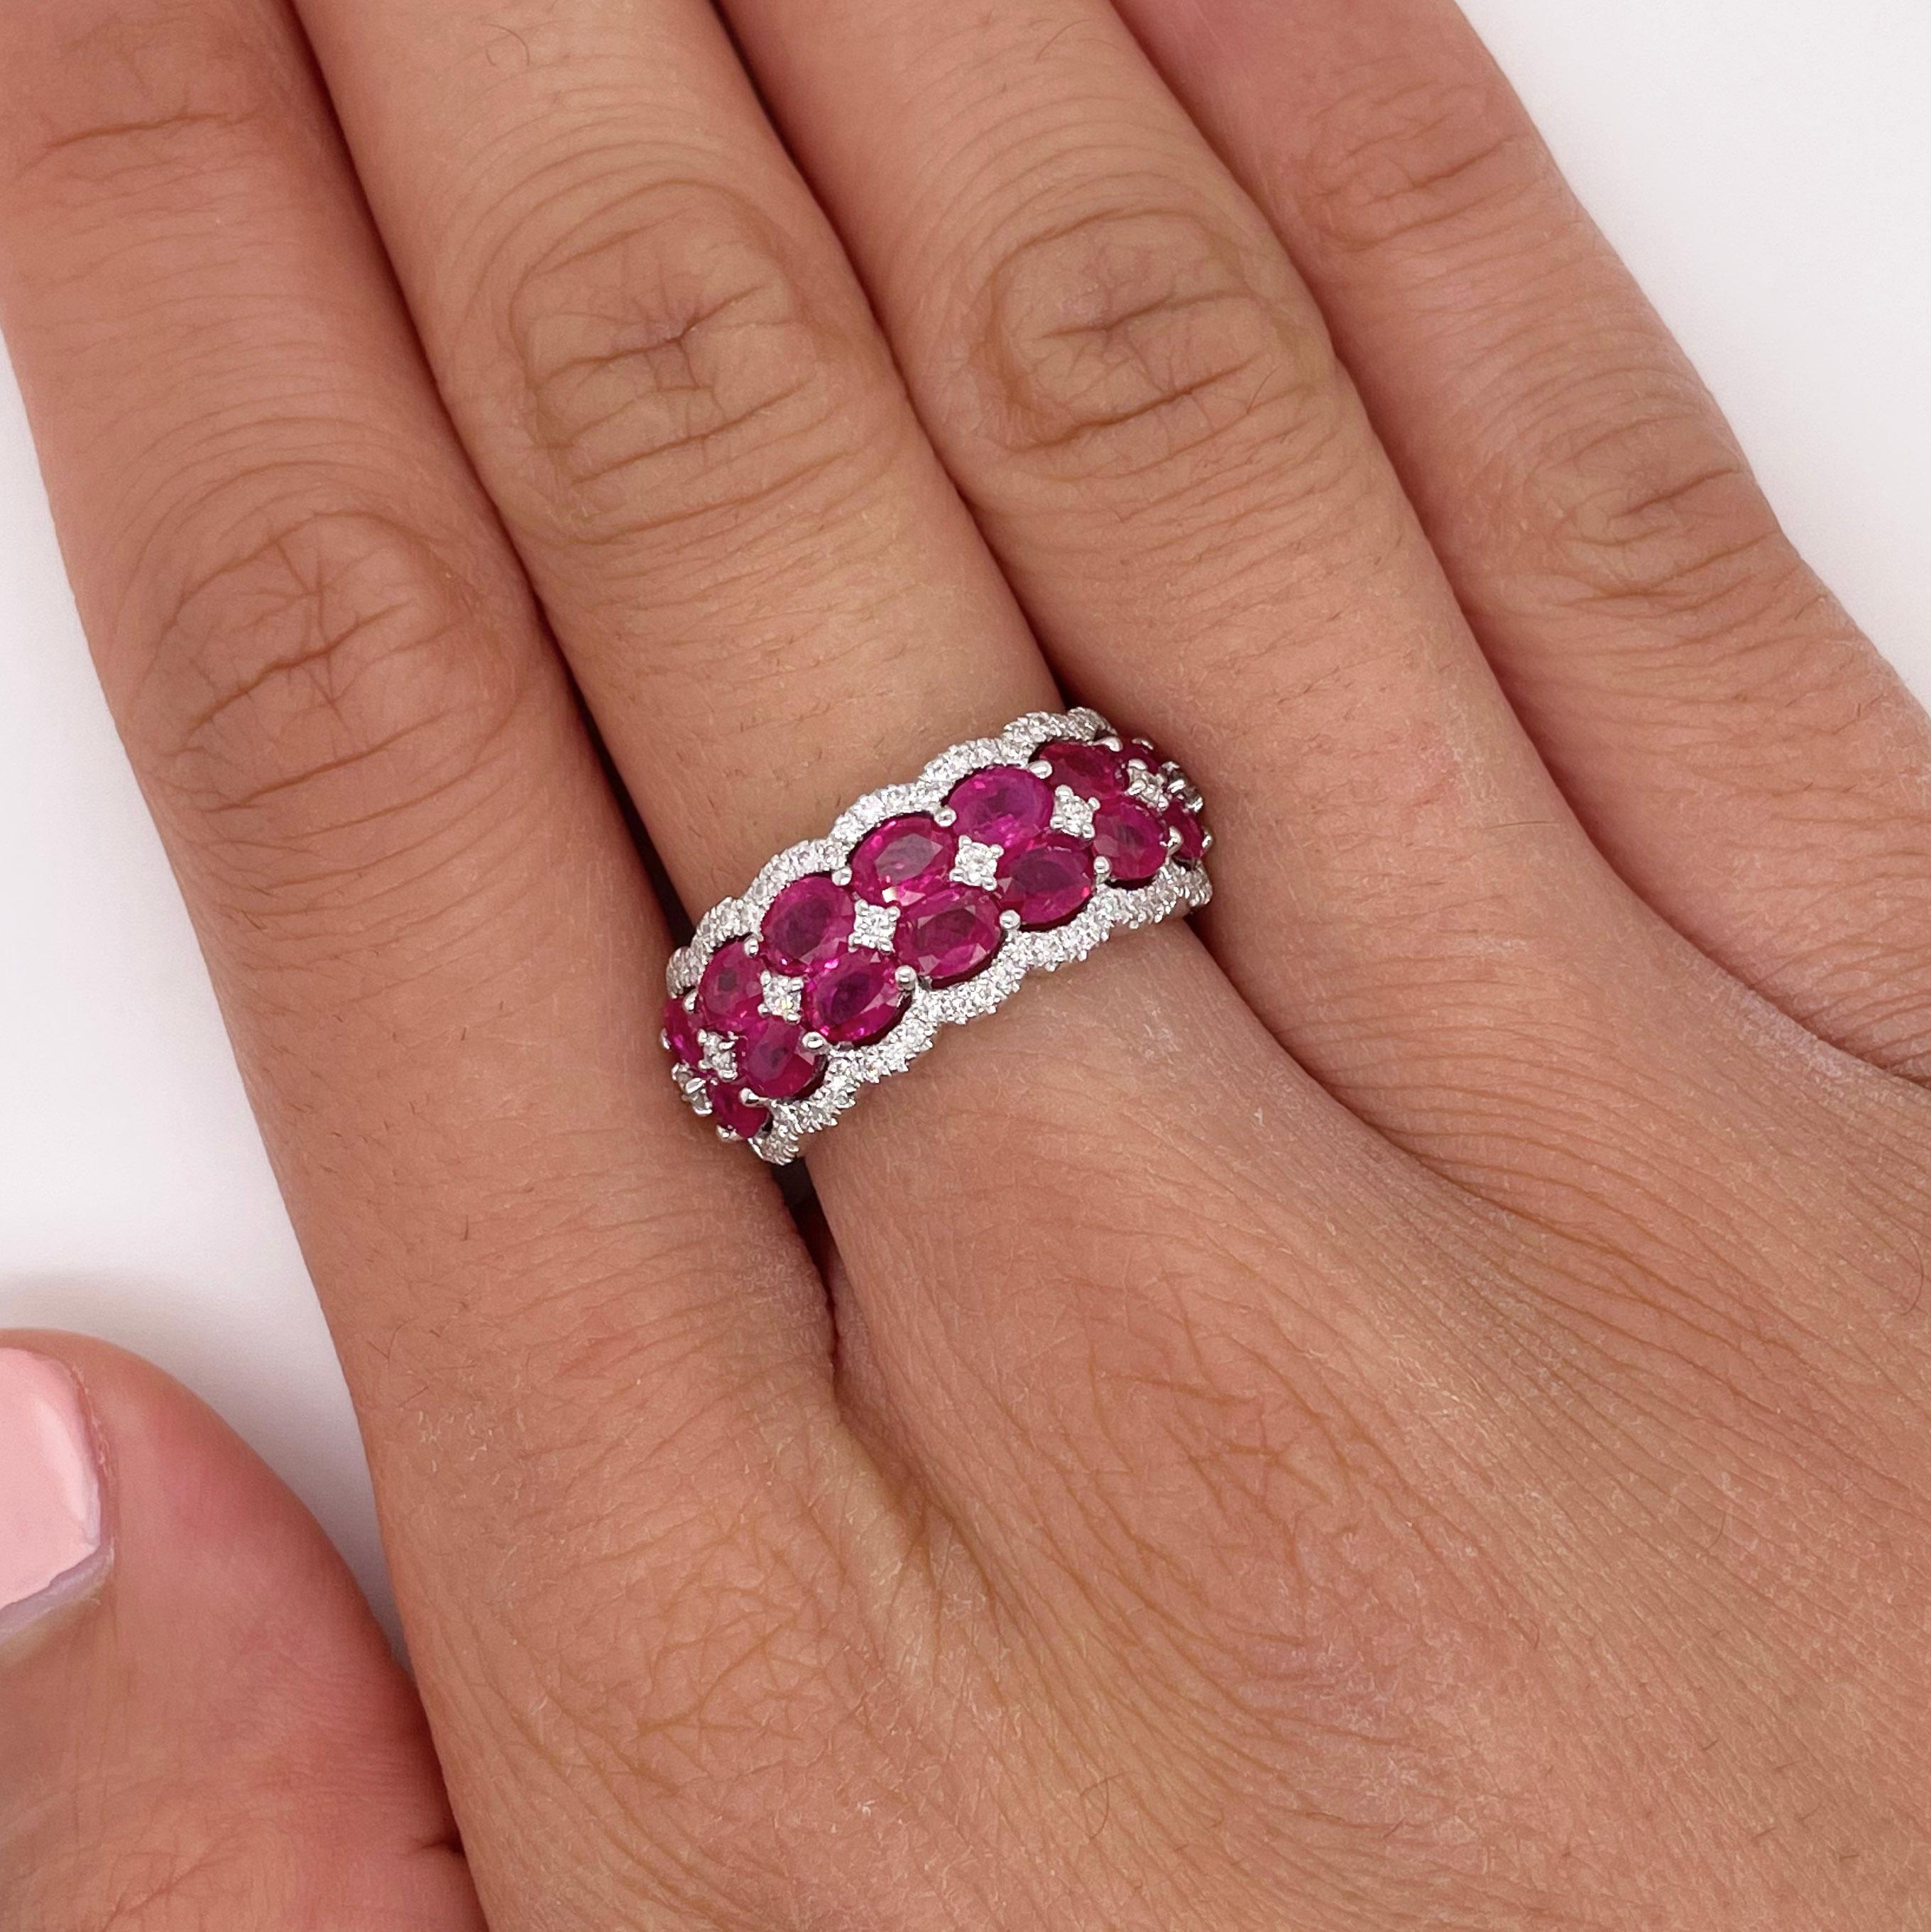 For Sale:  Wide Ruby Band w Diamonds and Genuine Rubies Wedding Anniversary Band Wide 4